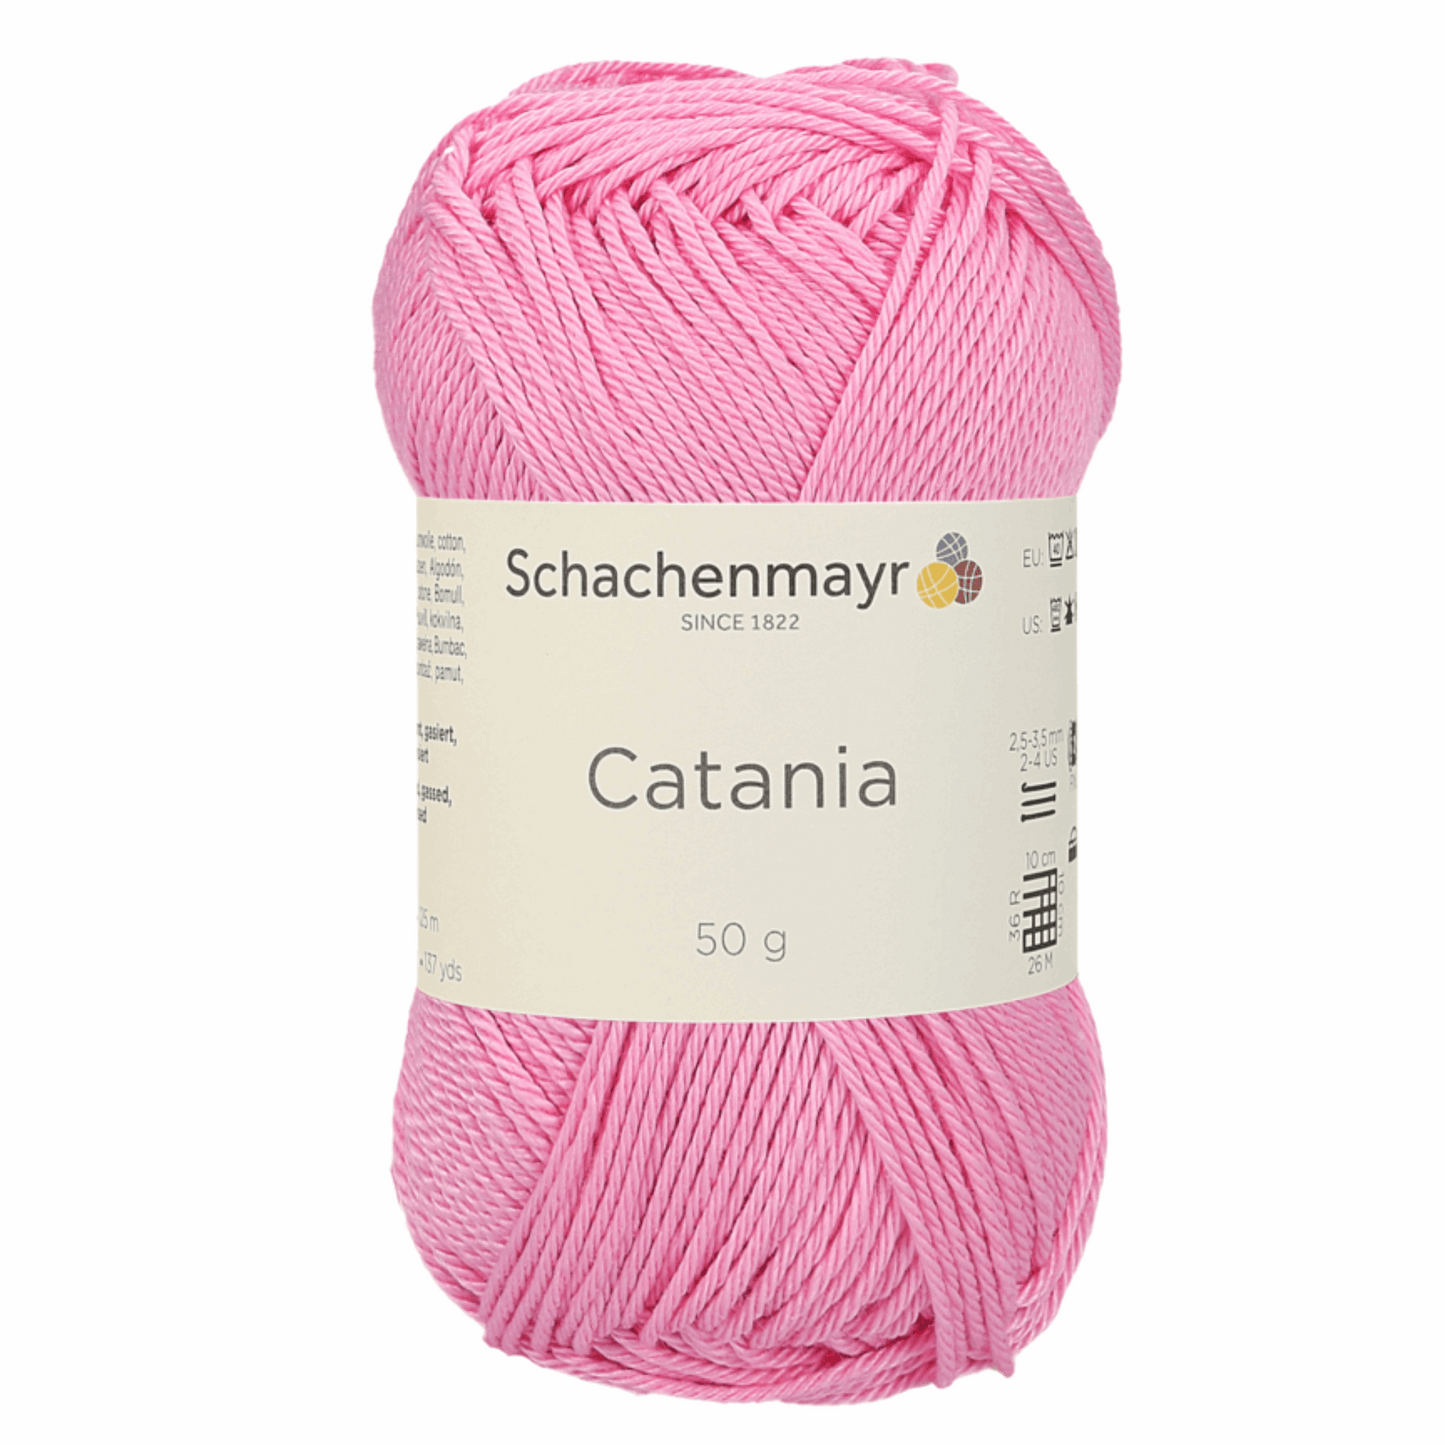 Catania 50g, 90344, color 222, orchid